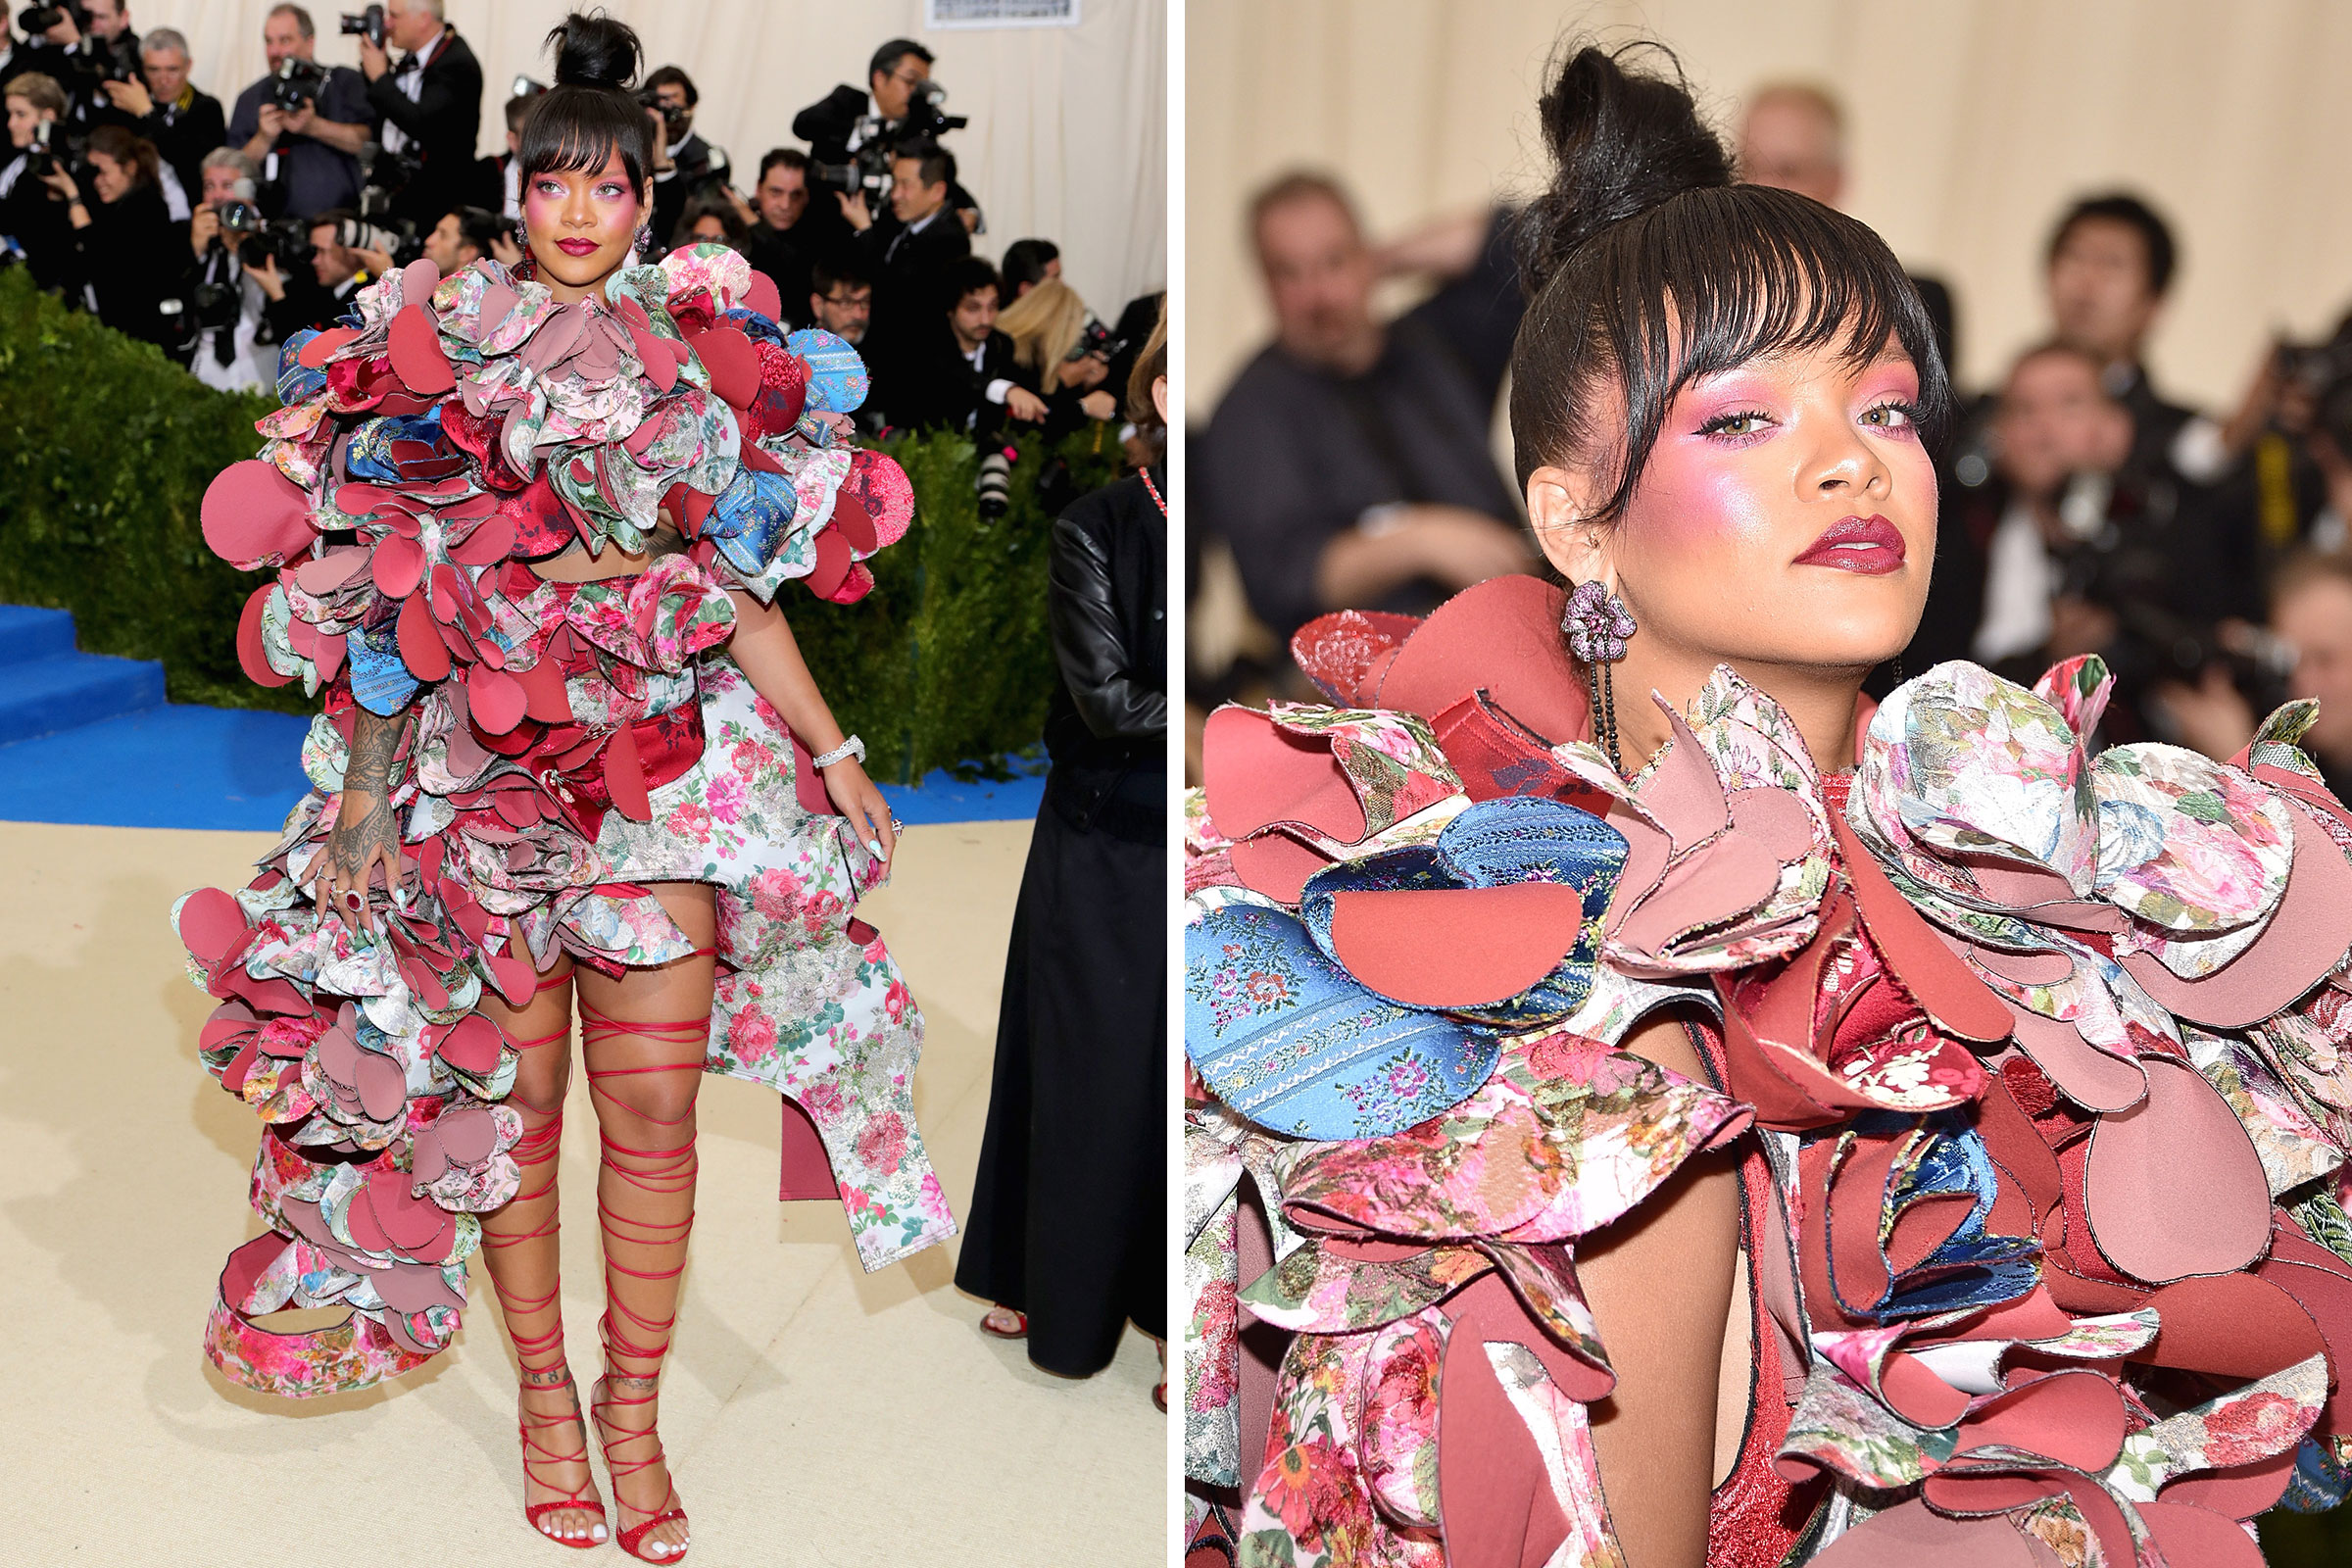 Rihanna attends the "Rei Kawakubo/Comme des Garcons: Art Of The In-Between" Costume Institute Gala at Metropolitan Museum of Art on May 1, 2017. (Neilson Barnard—Getty Images; Kevin Mazur—WireImage/Getty Images)